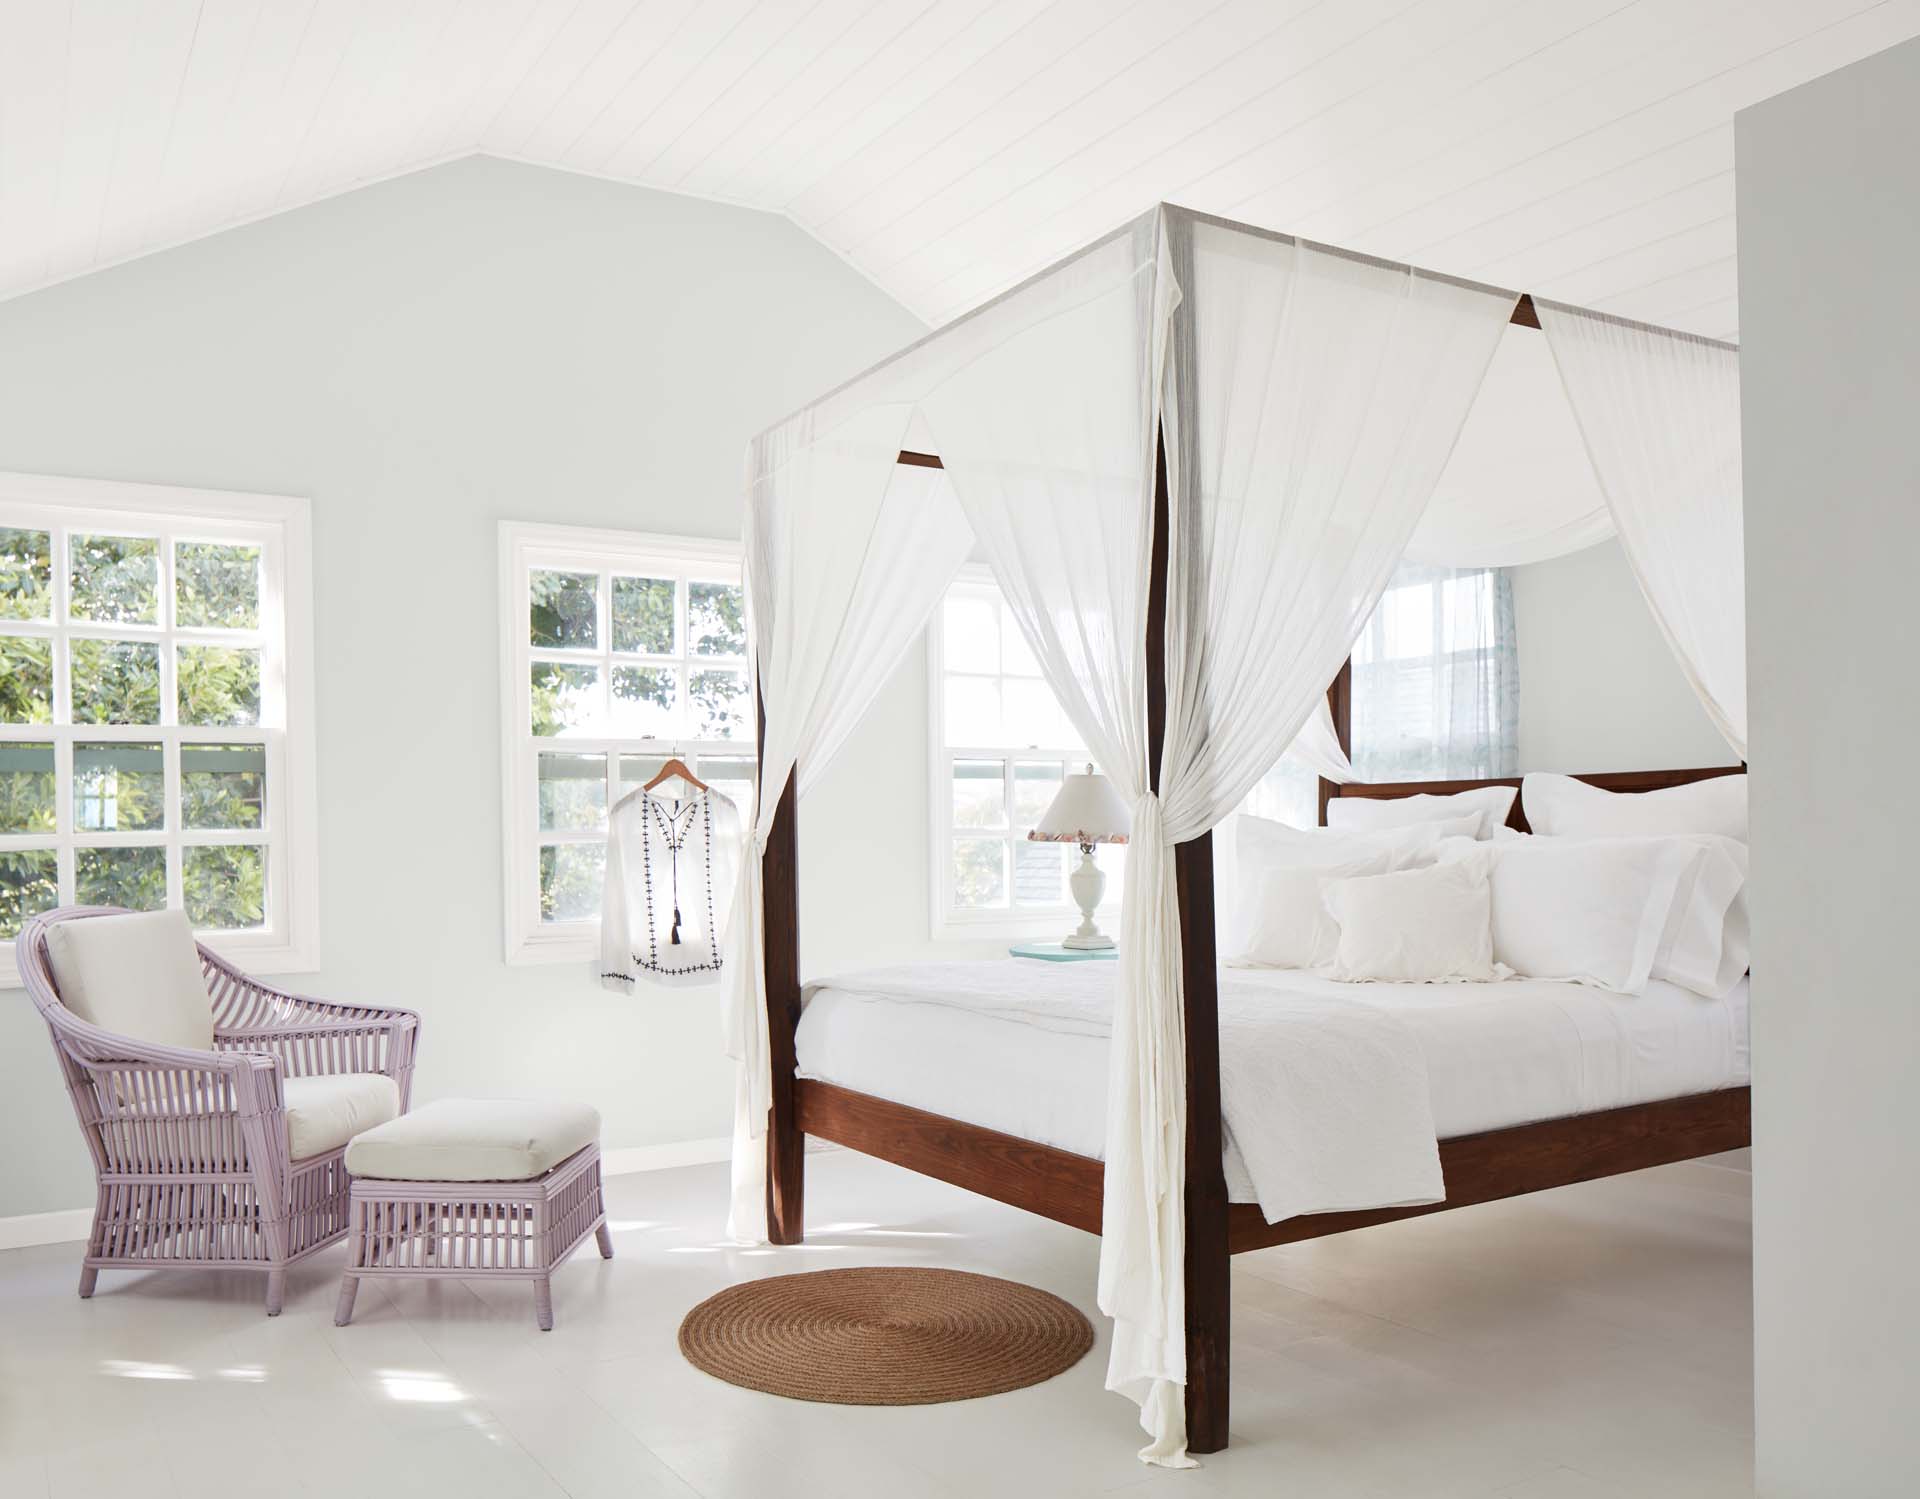 An airy room decorated in white